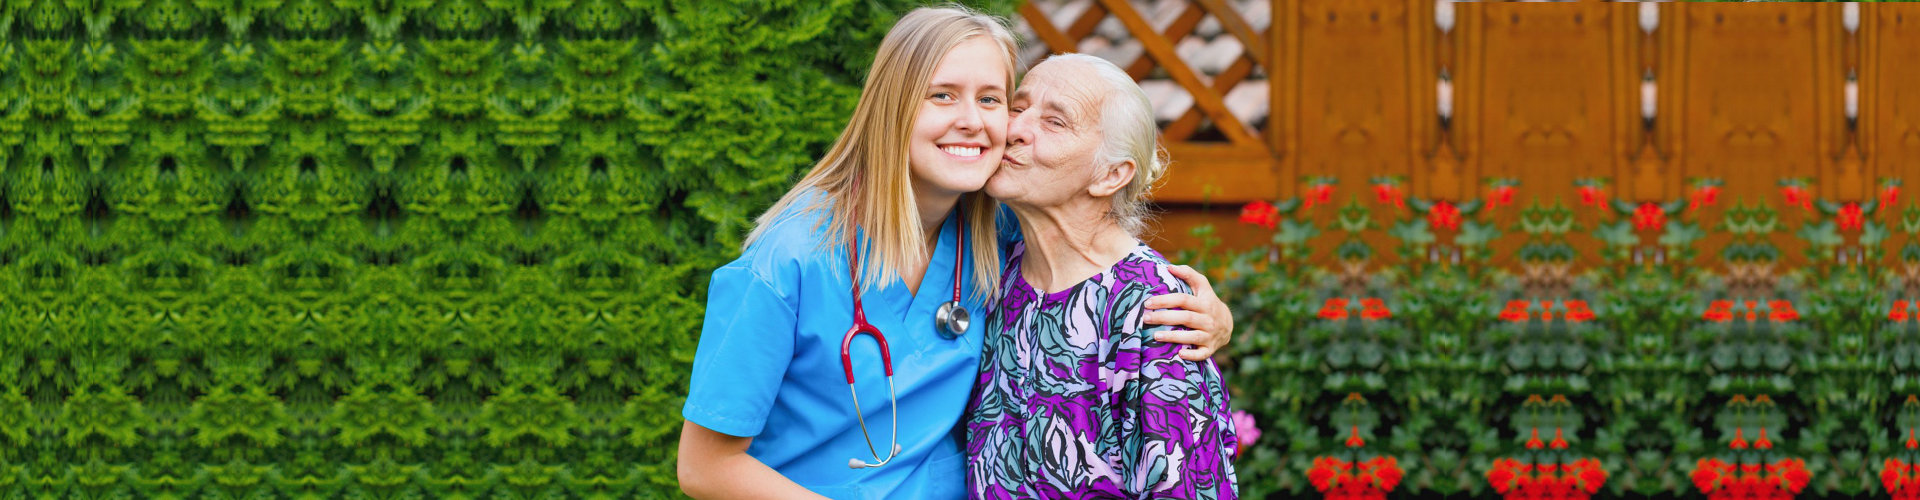 caregiver with elder woman outdoors